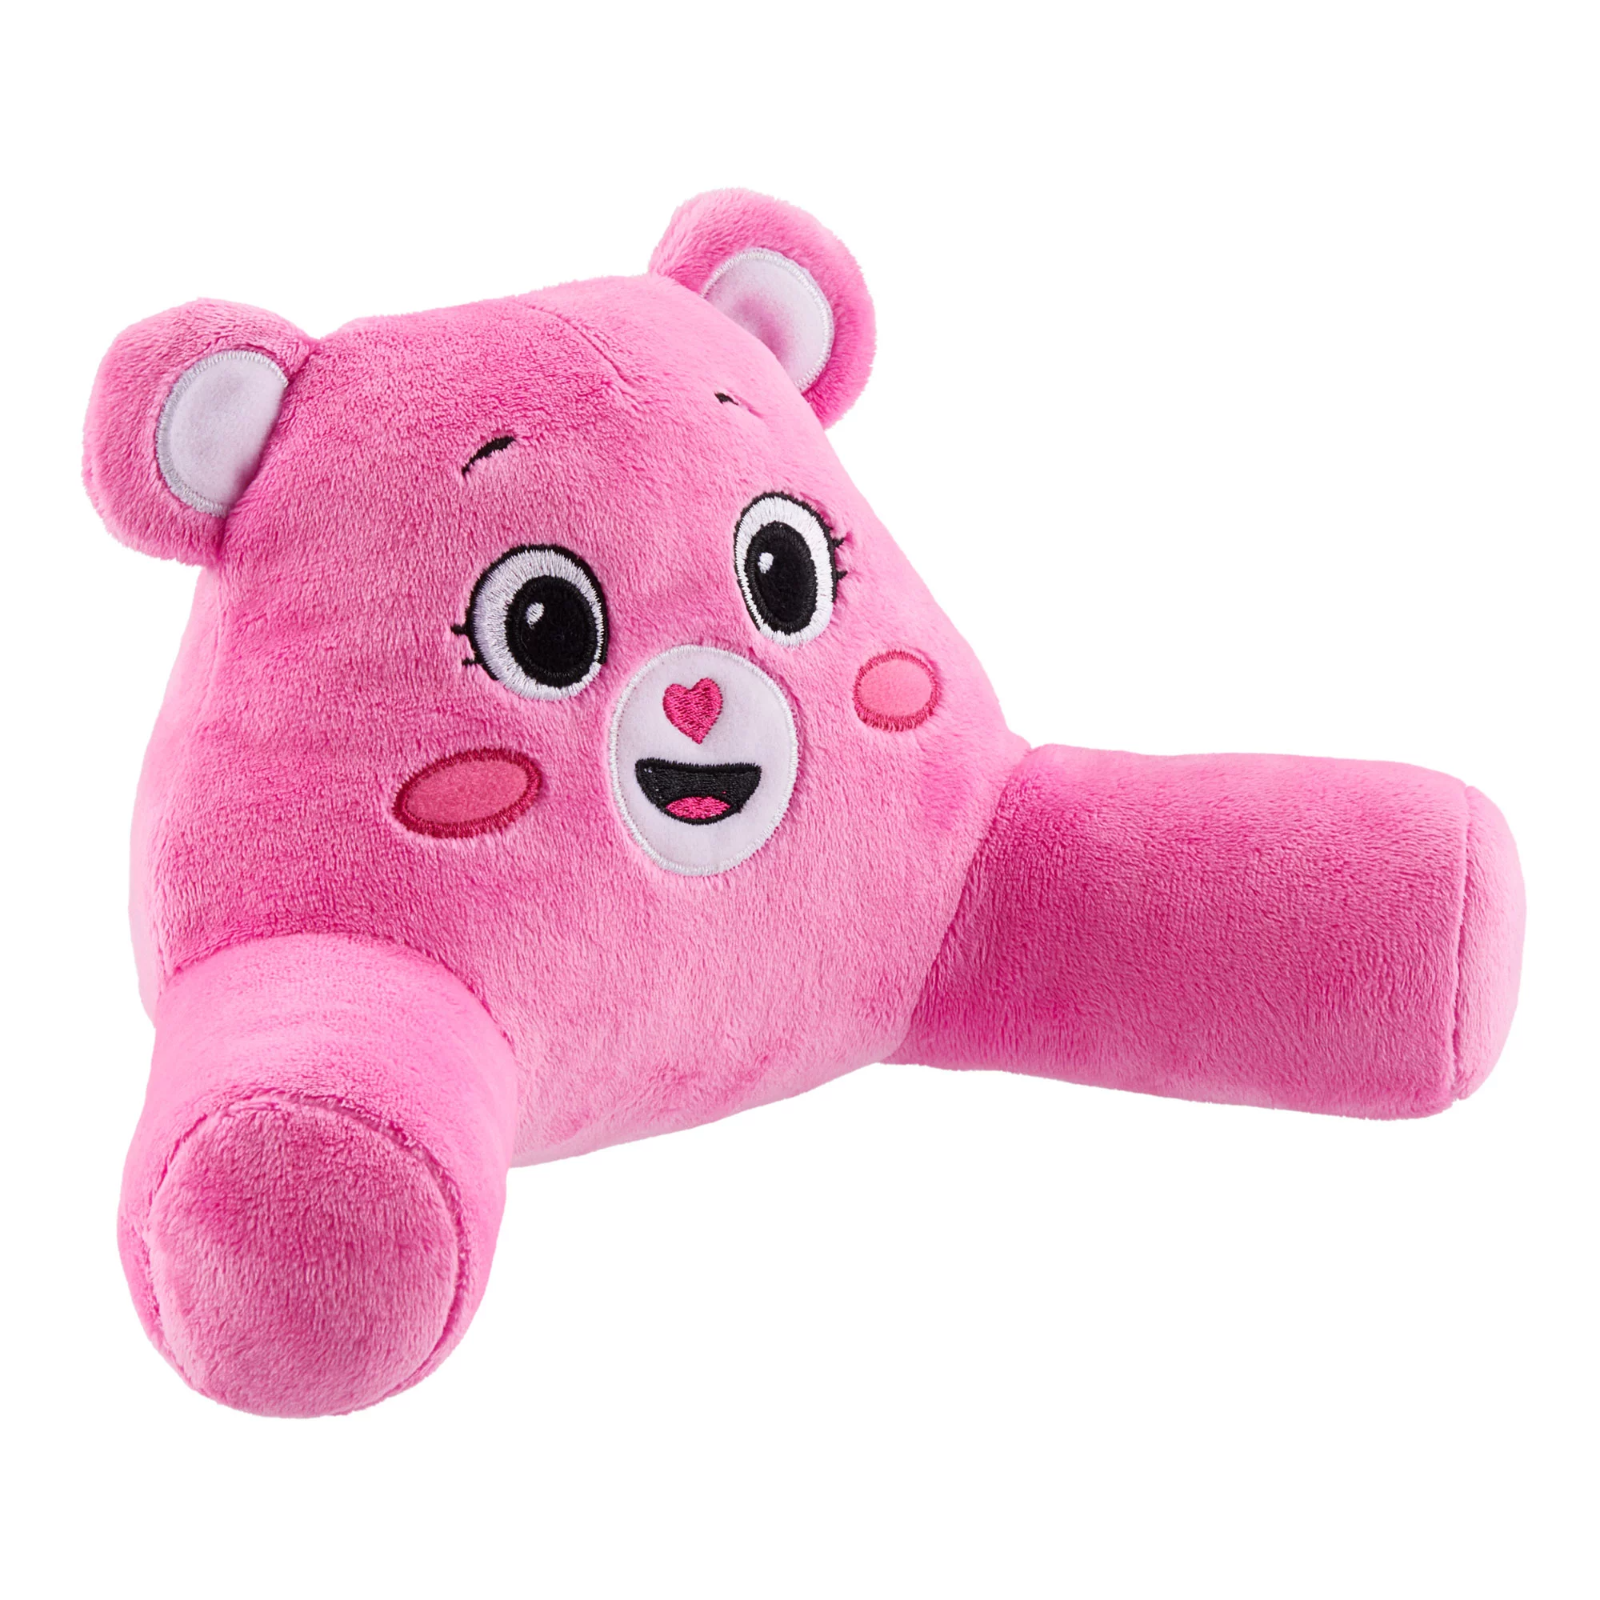 My Life As Soft Plush Doll Lounge Pillow - New - Pink Care Bear - $24.99